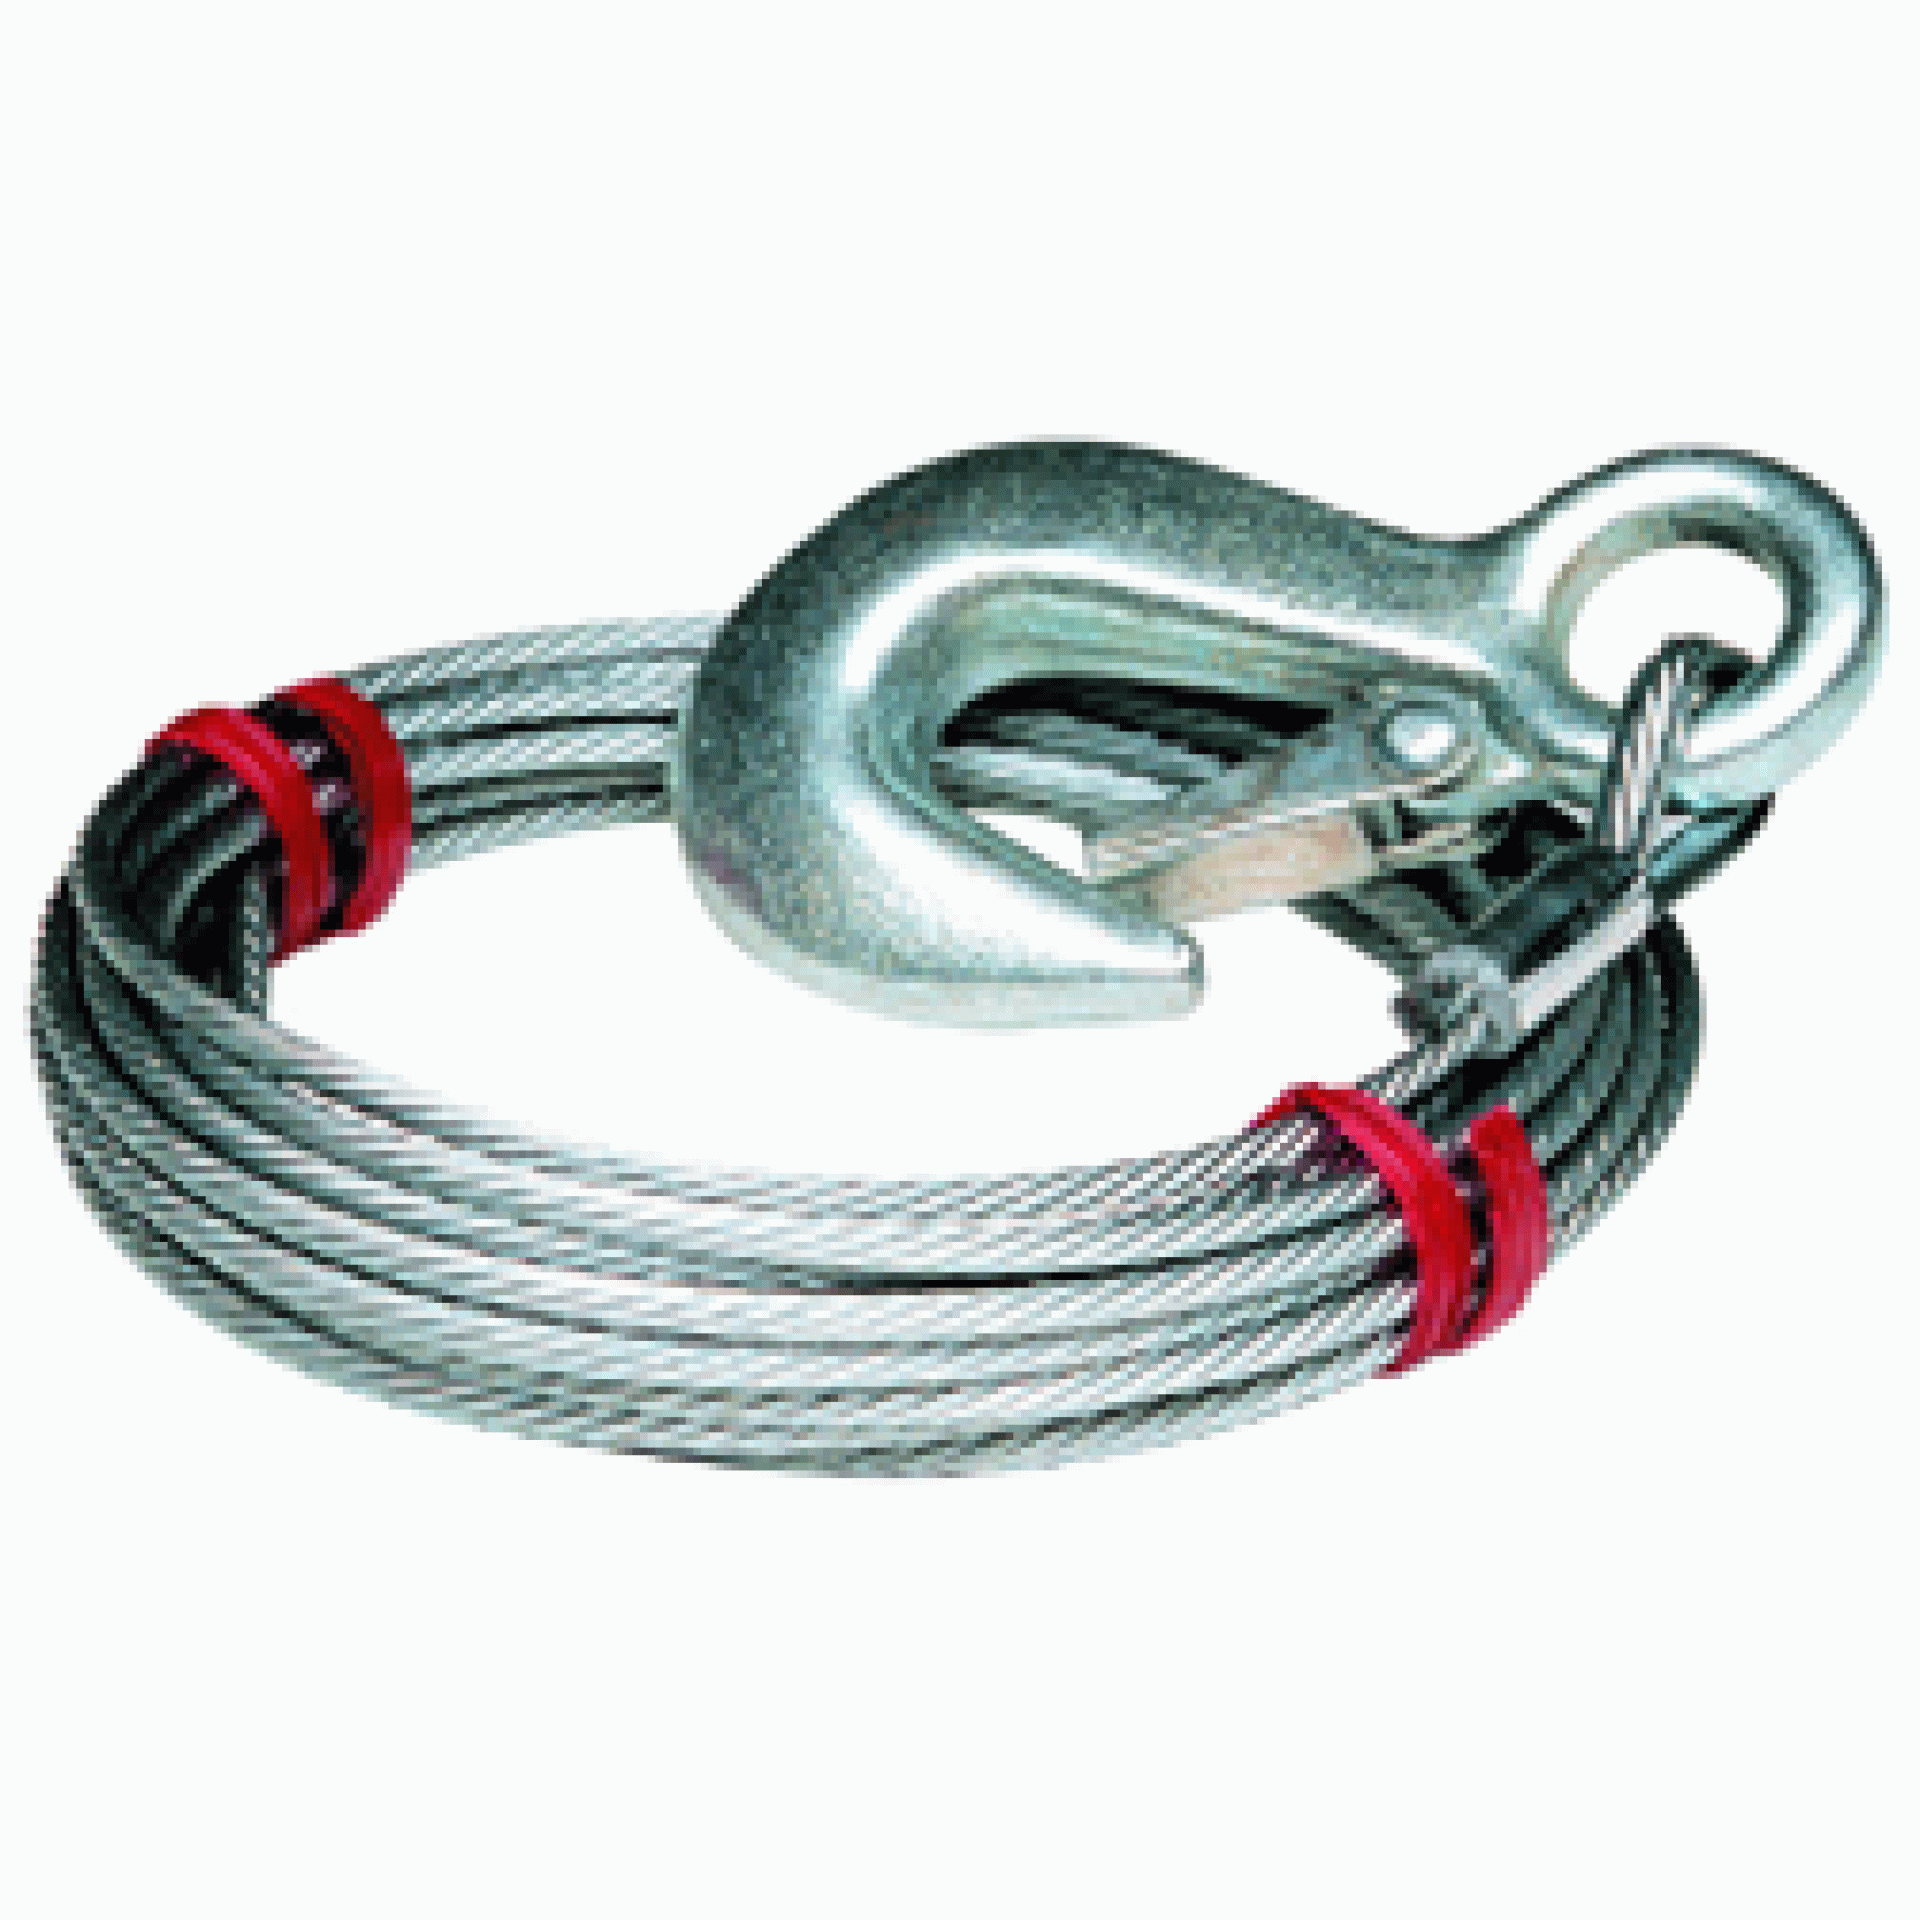 TIE DOWN ENGINEERING INC | 59379 | WINCH CABLE 3/16" X 20' 4200 LB